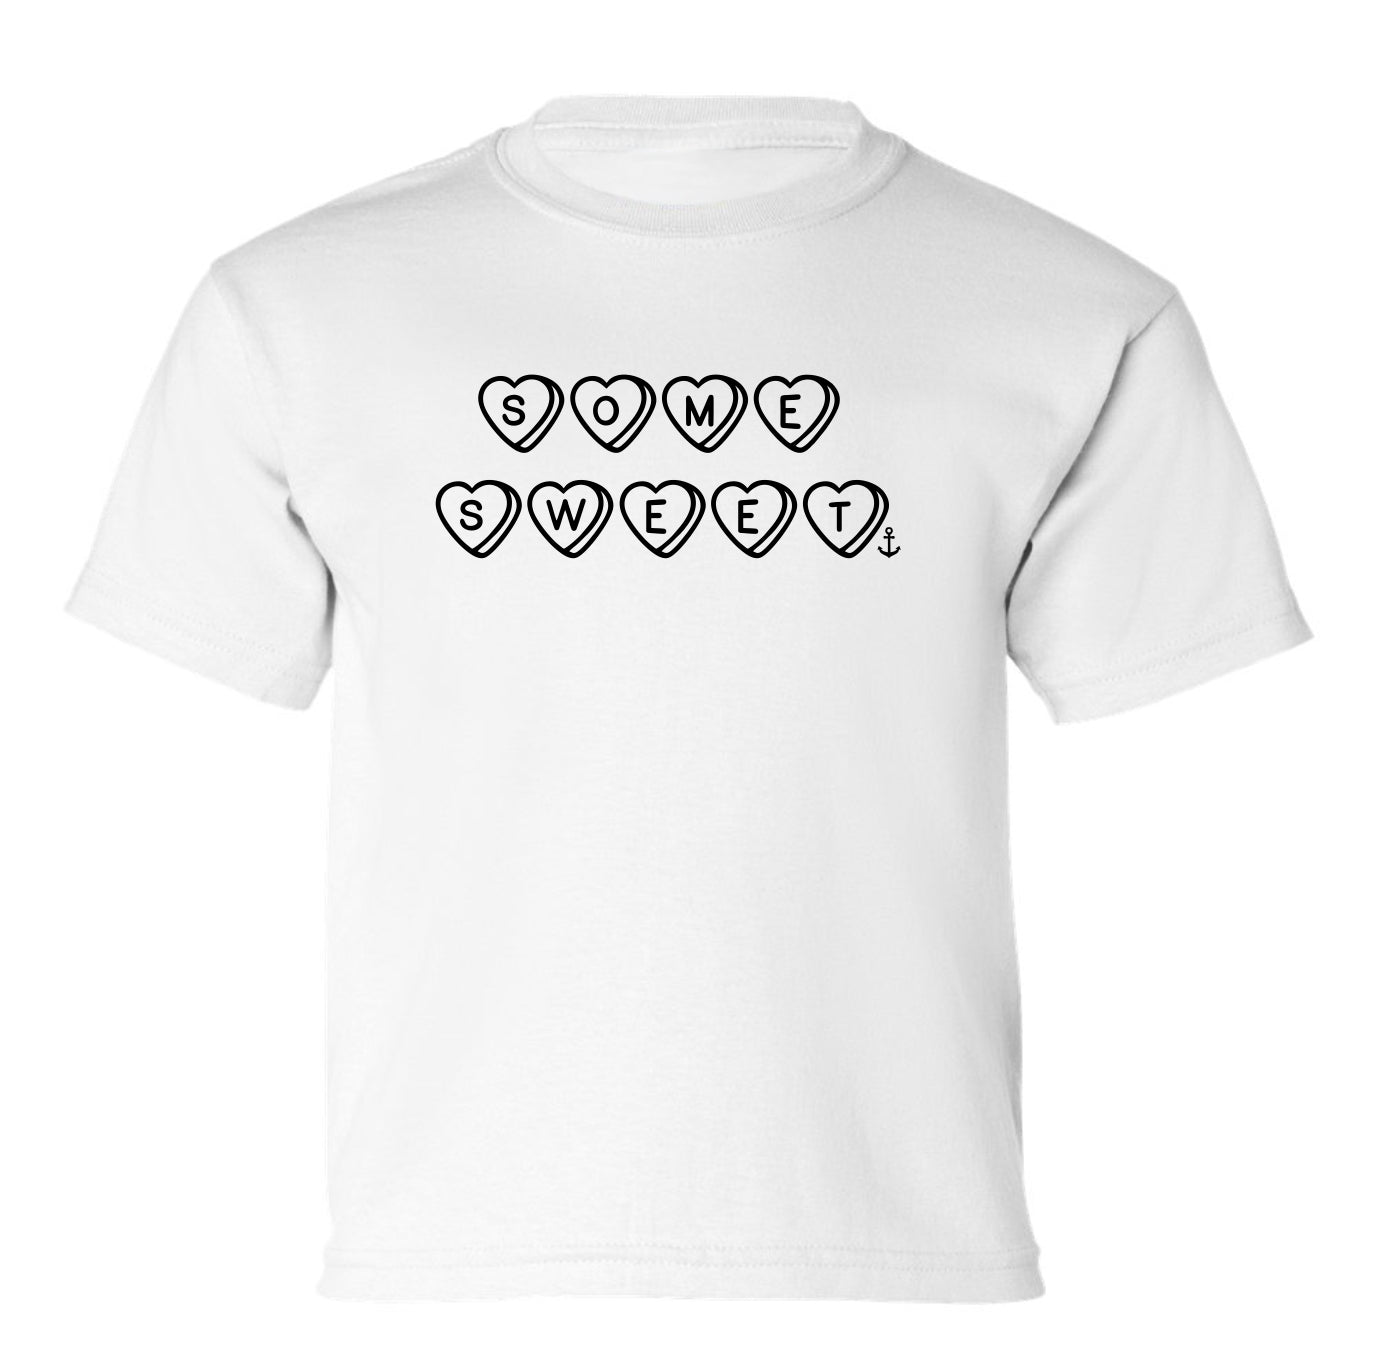 "Some Sweet" Toddler/Youth T-Shirt